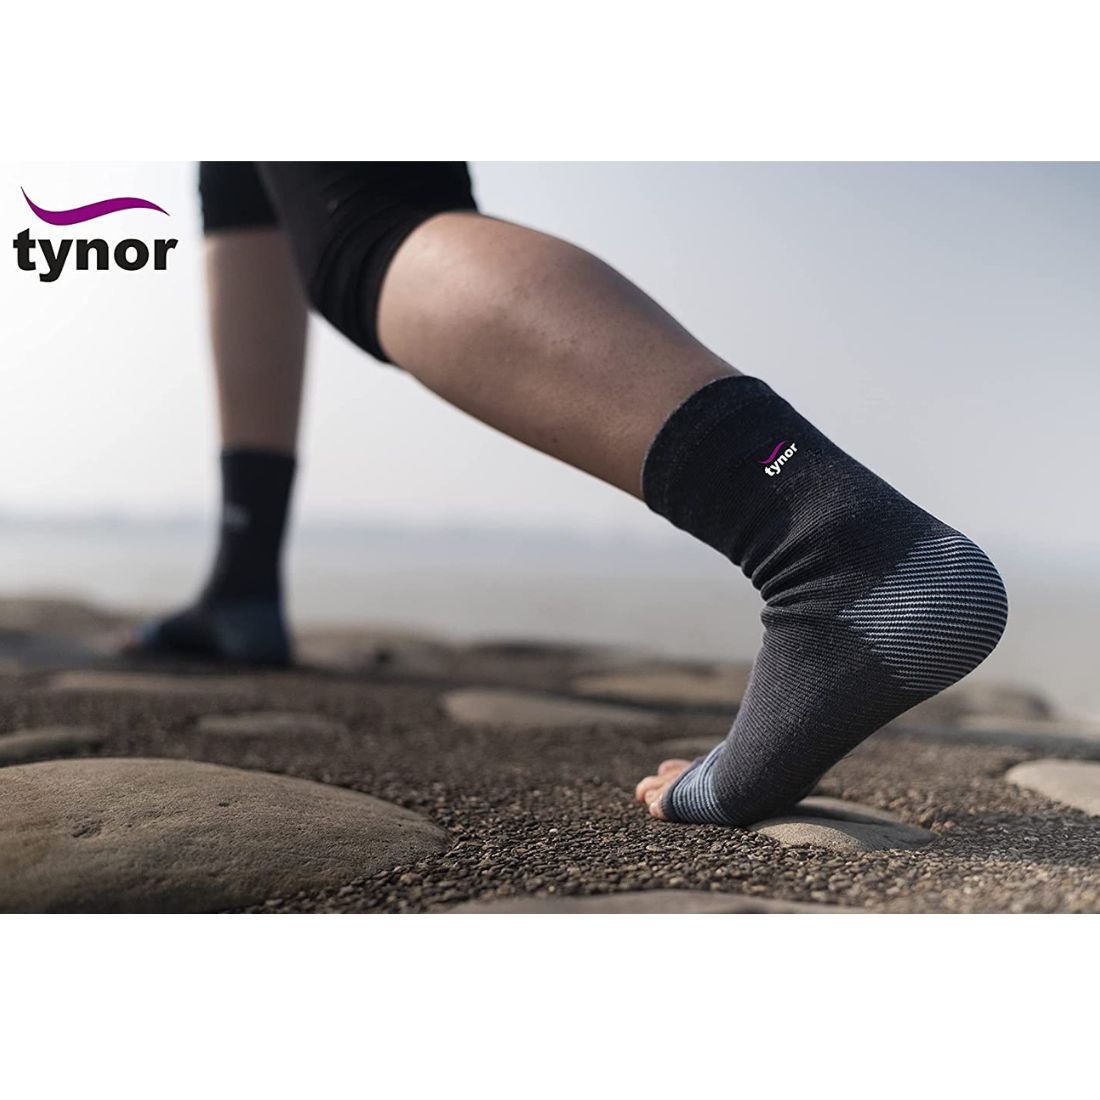 Anklet Comfeel is a to provide mild compression, warmth and support to the ankle joint.